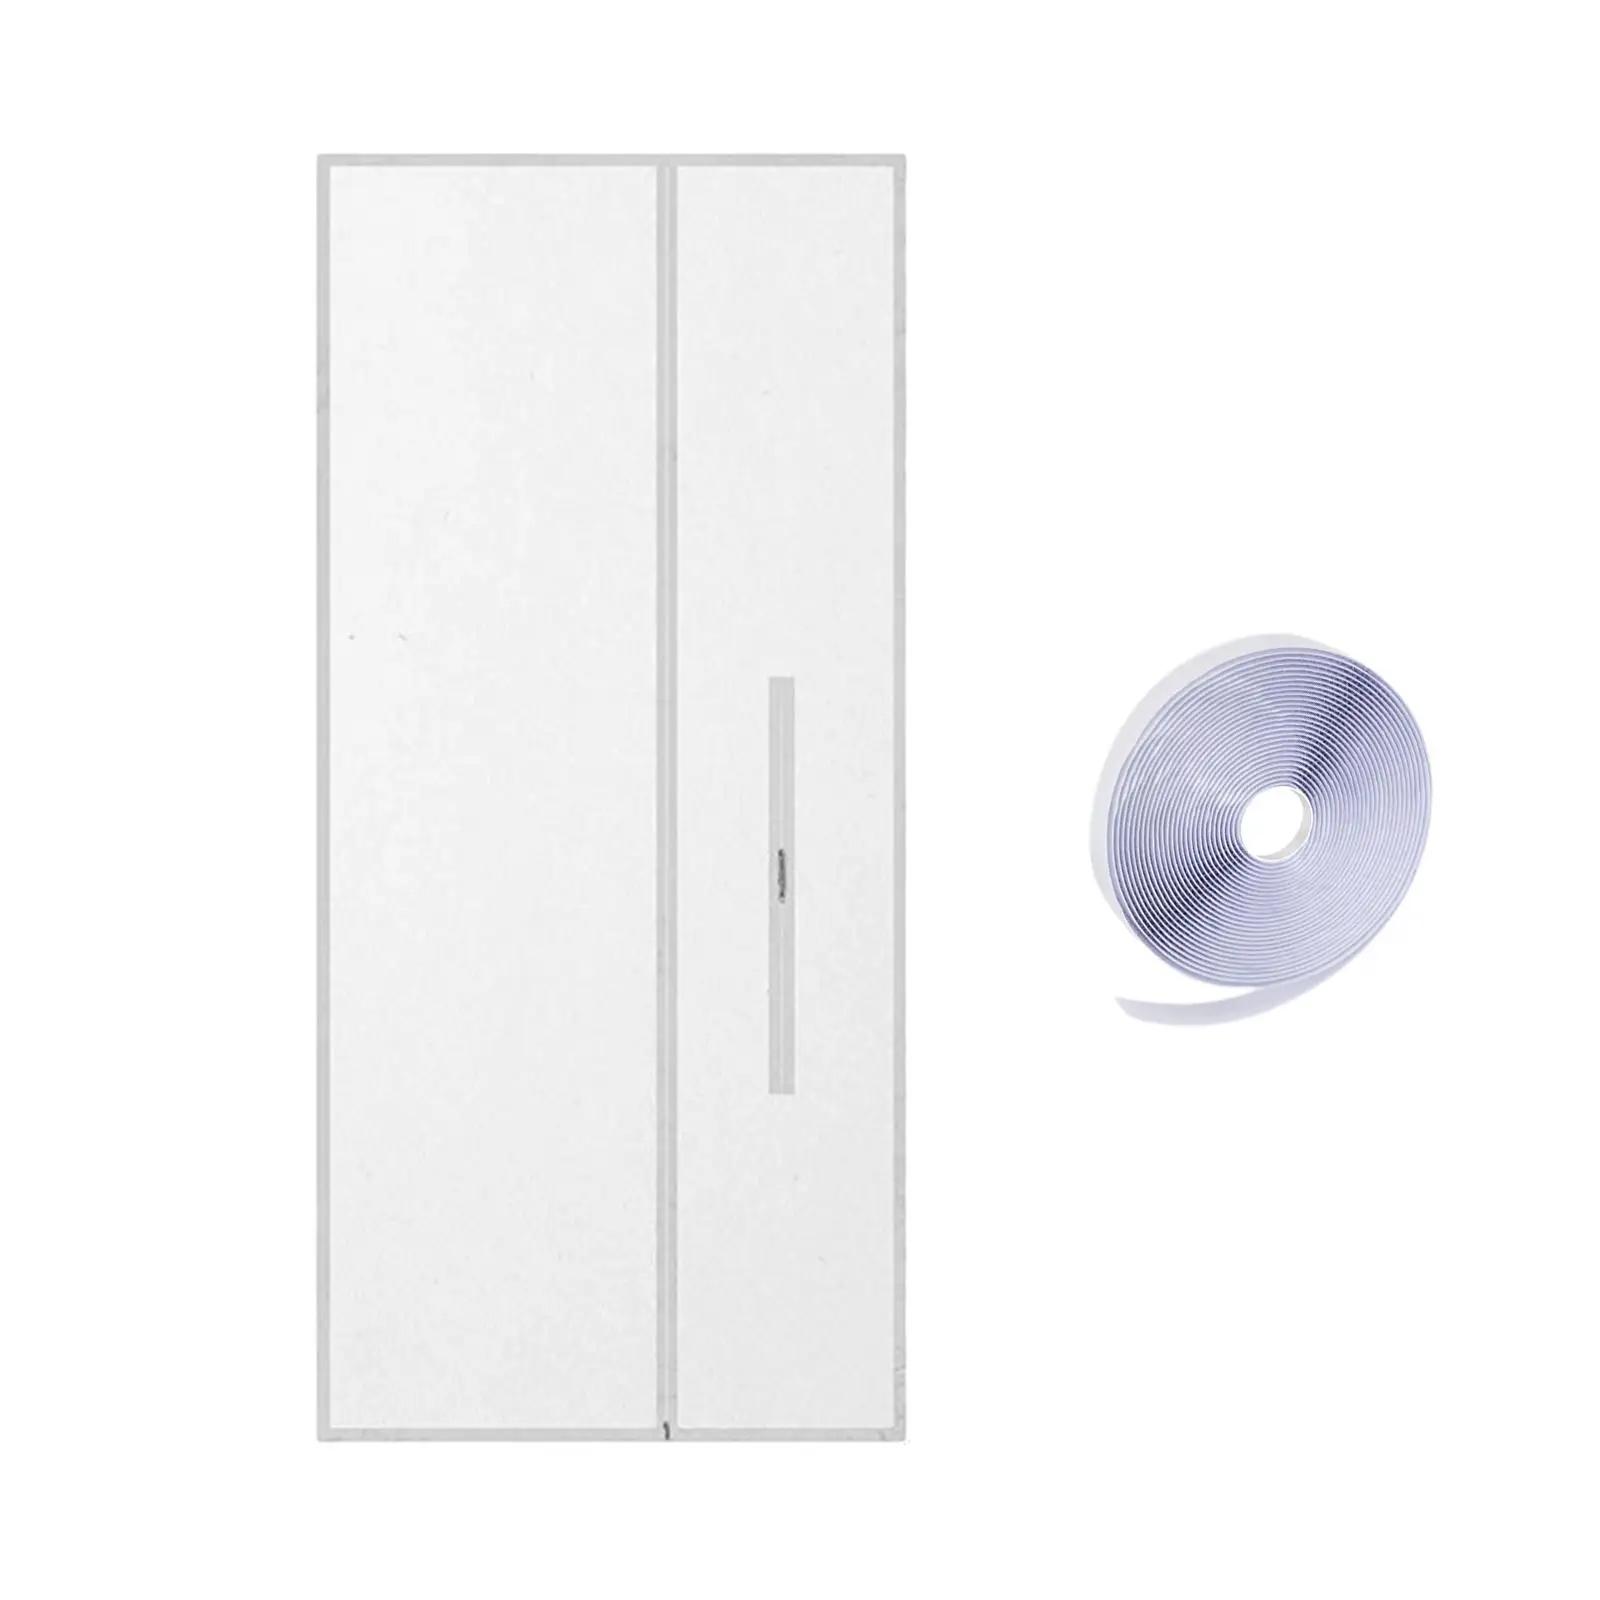 Screen Door Seal for Portable Air Conditioner Air Conditioning Door Cover Seal Window Seal Easy to Install for Bedroom